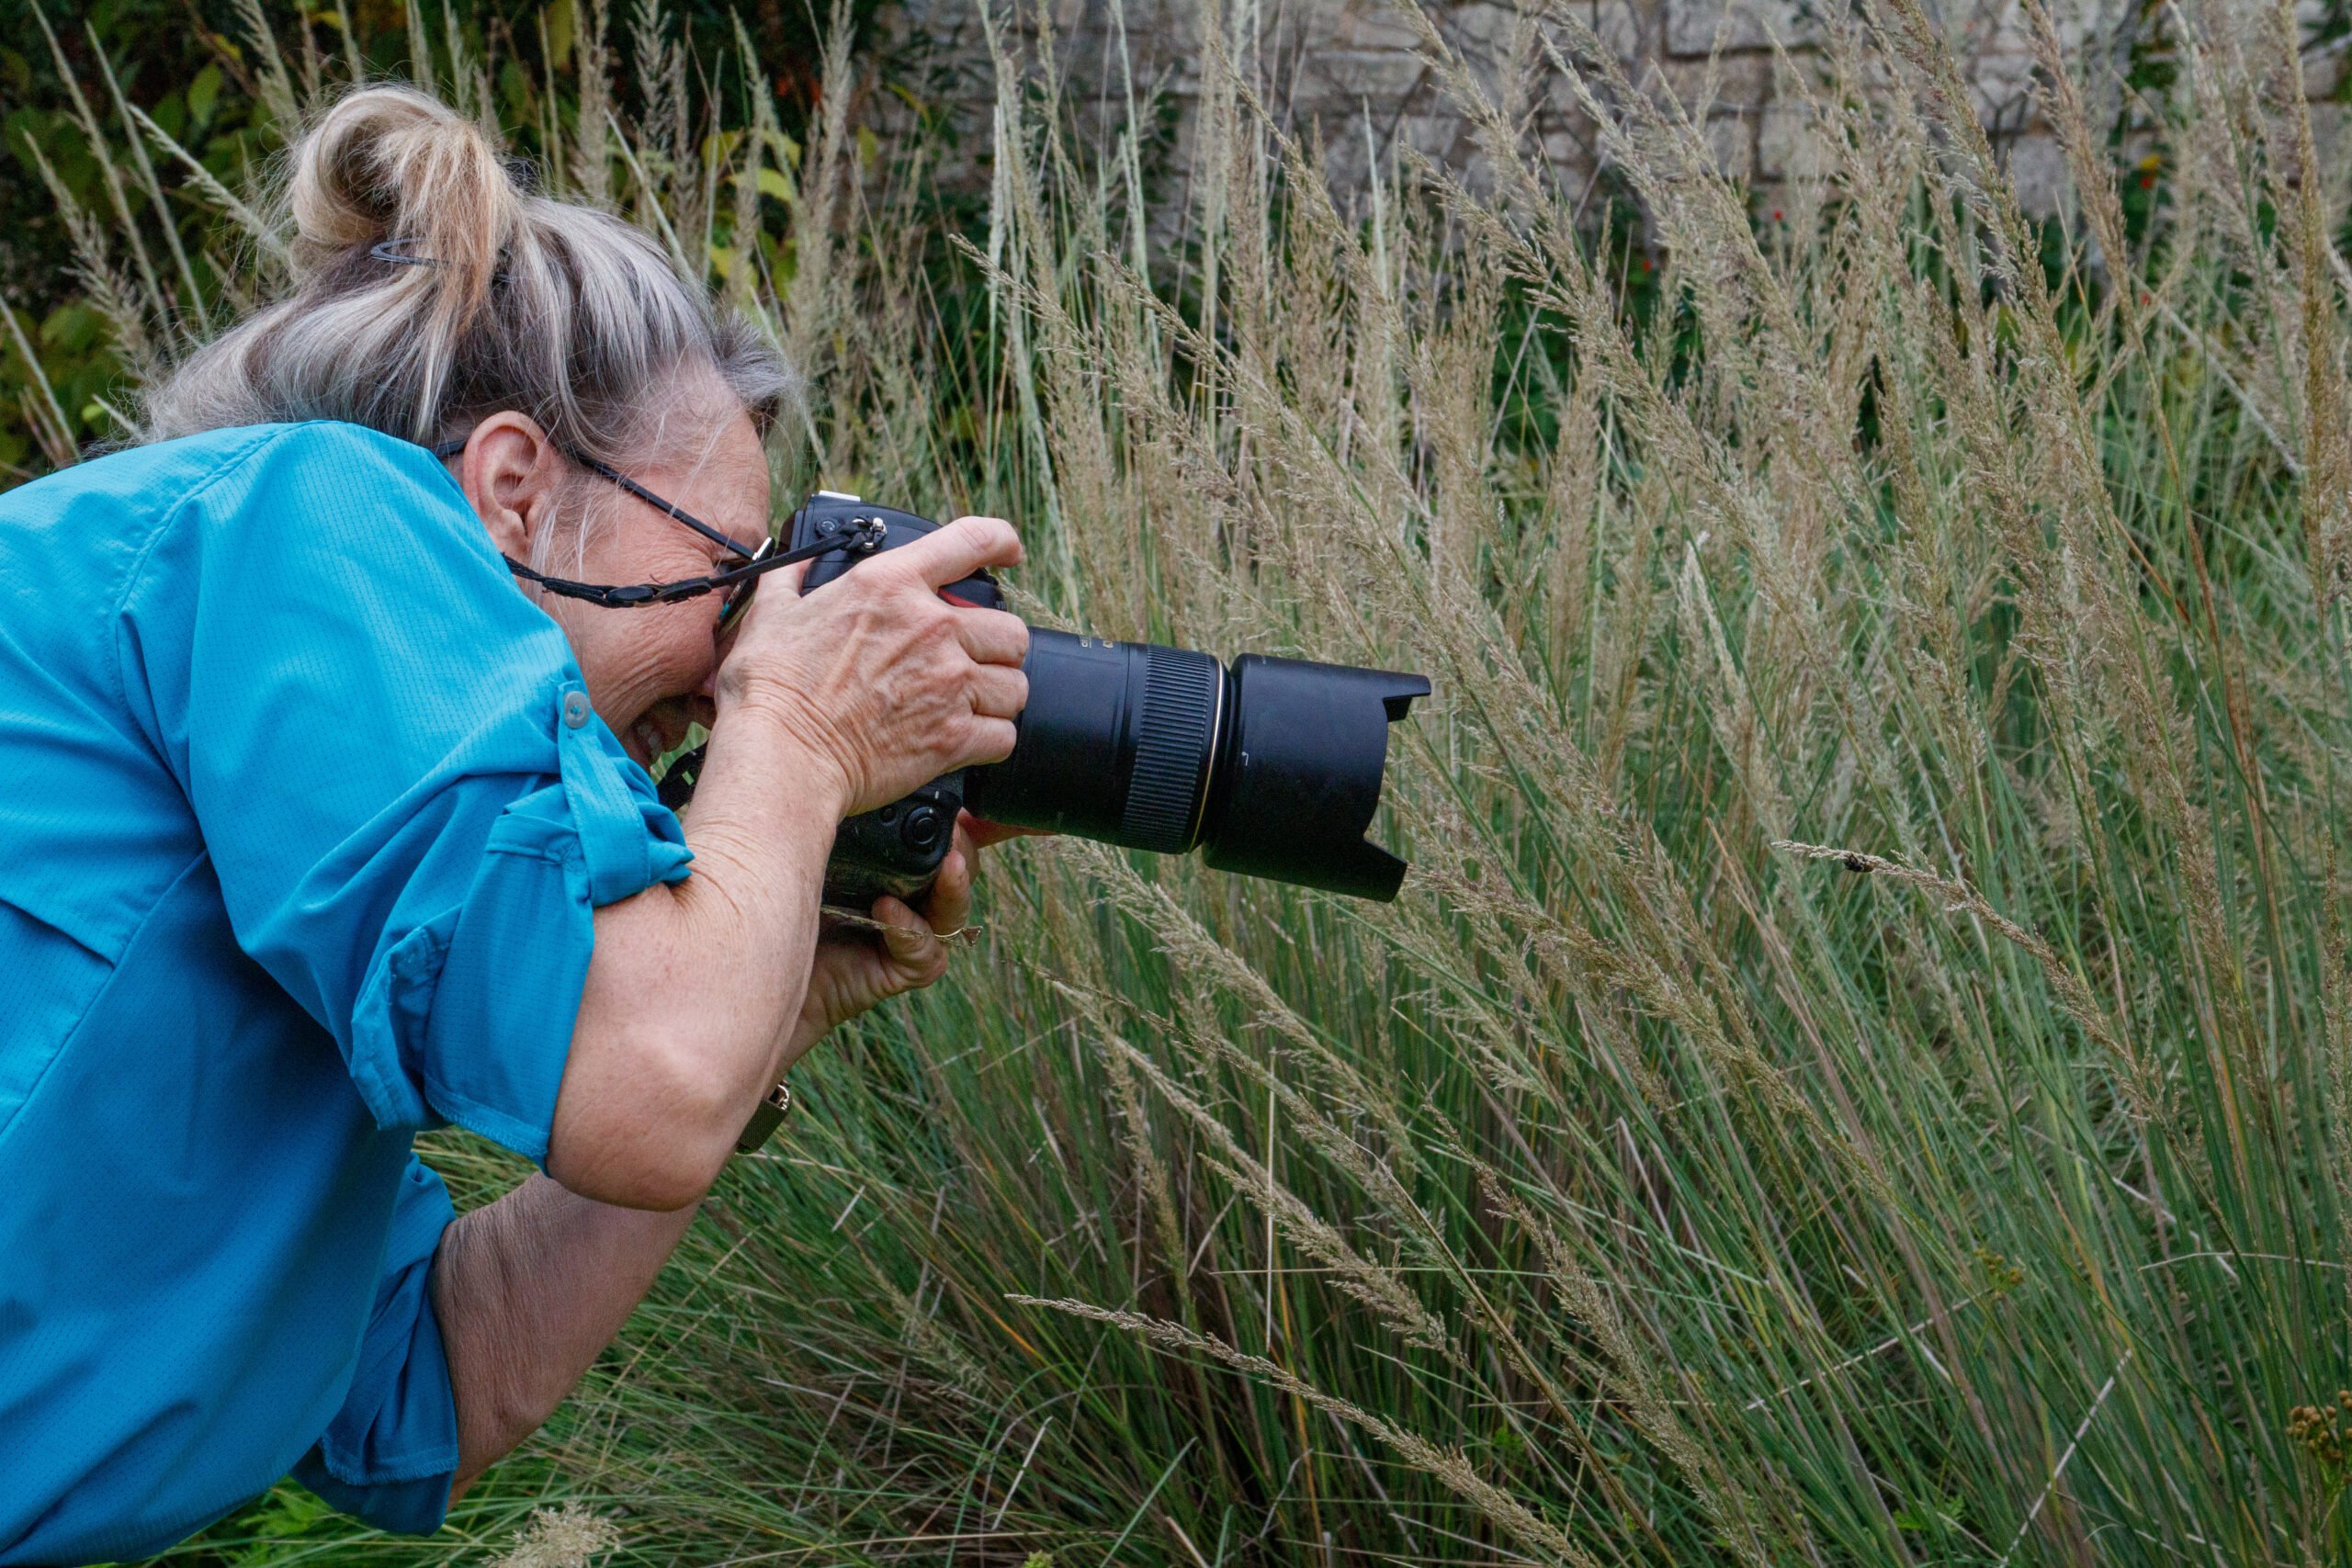 A white woman with graying hair, in a blue shirt, takes a photo with a long macro lens, focusing on an insect in the overgrown grass.